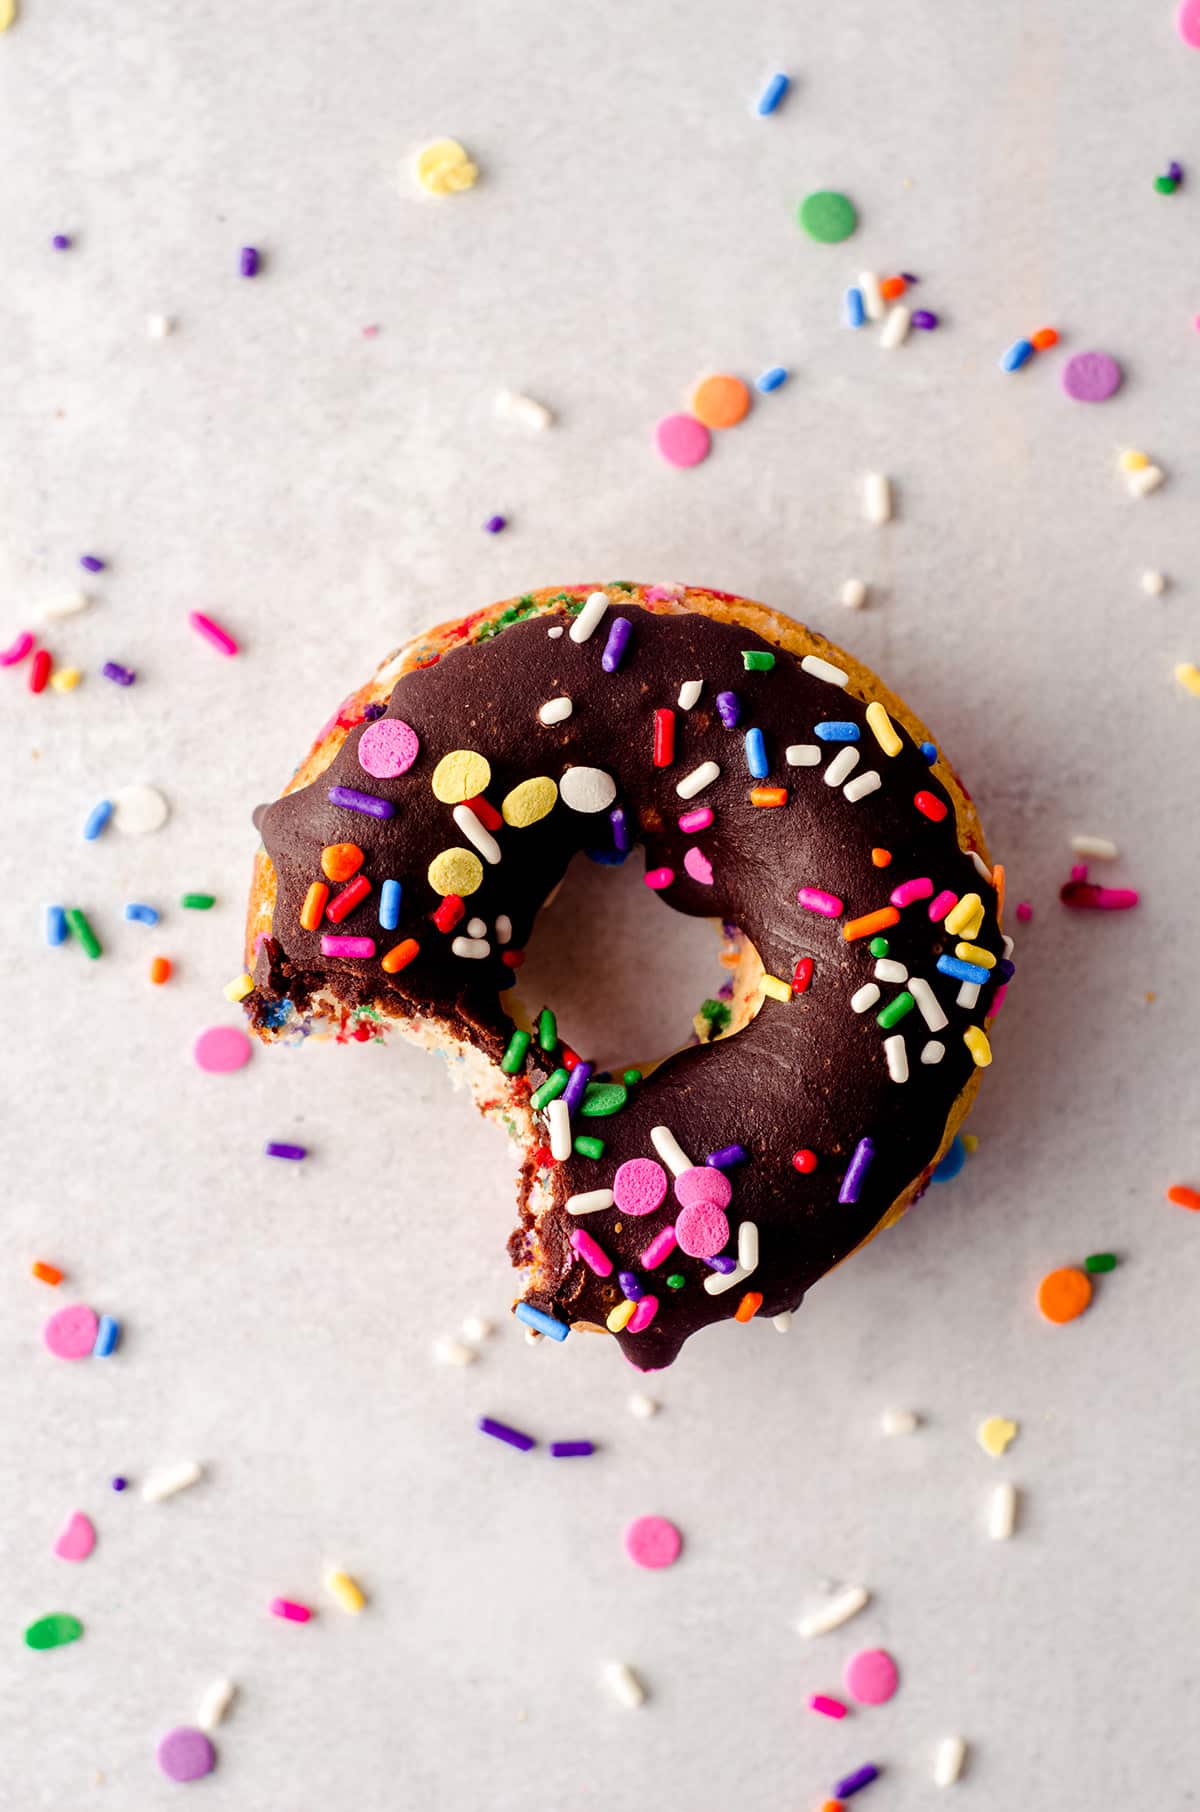 aerial photo of one funfetti donut with chocolate glaze with a bite taken out of it and surrounded by lots of rainbow sprinkles